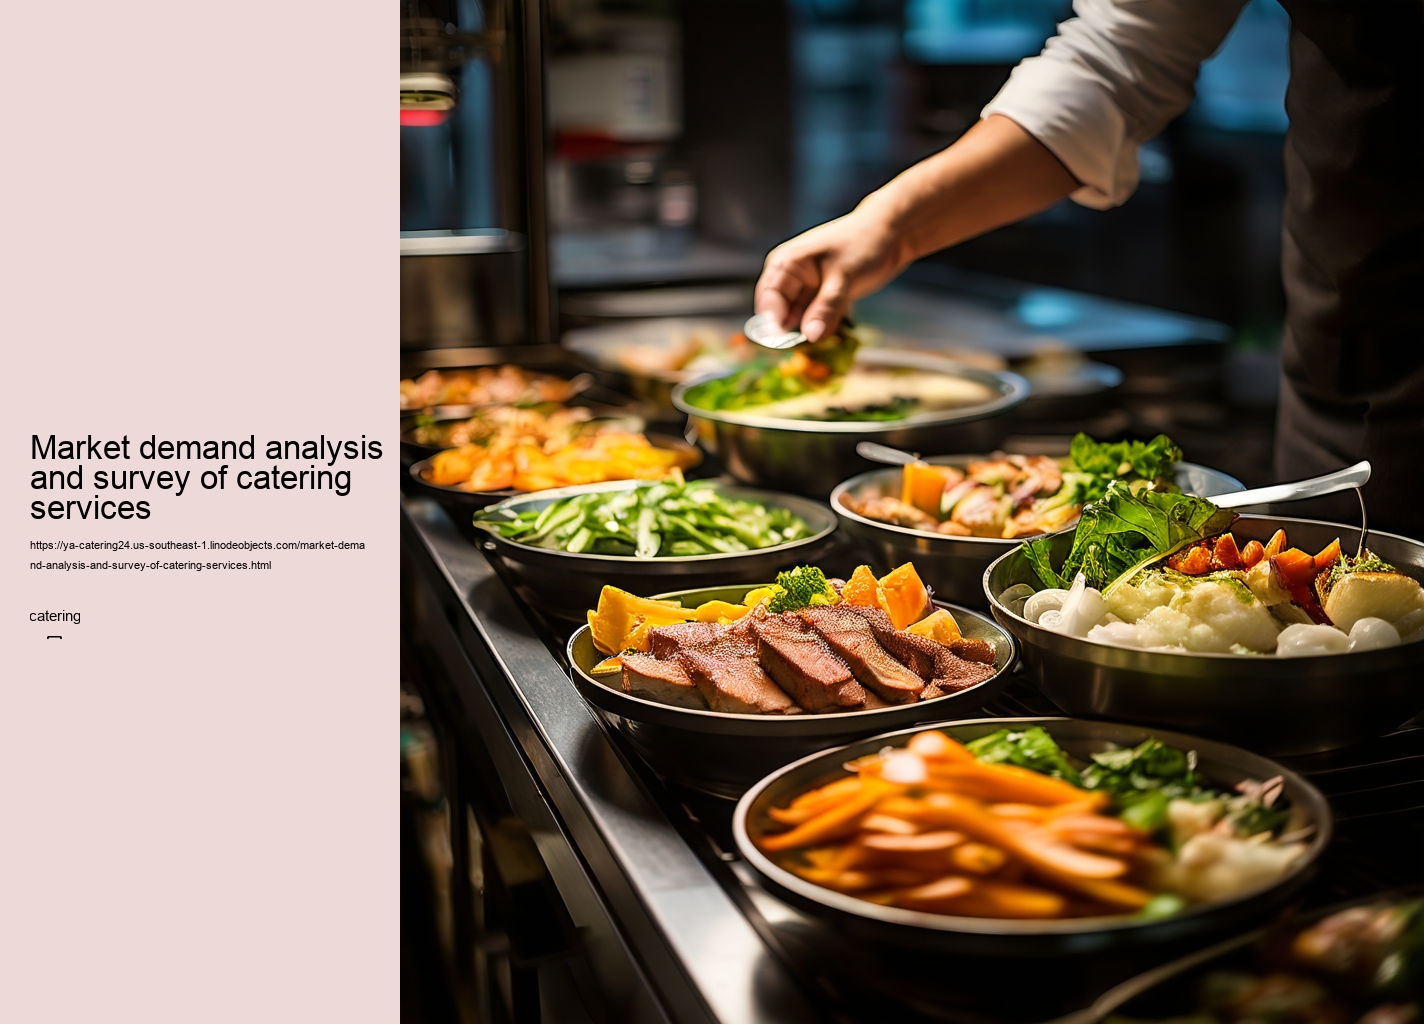 Market demand analysis and survey of catering services